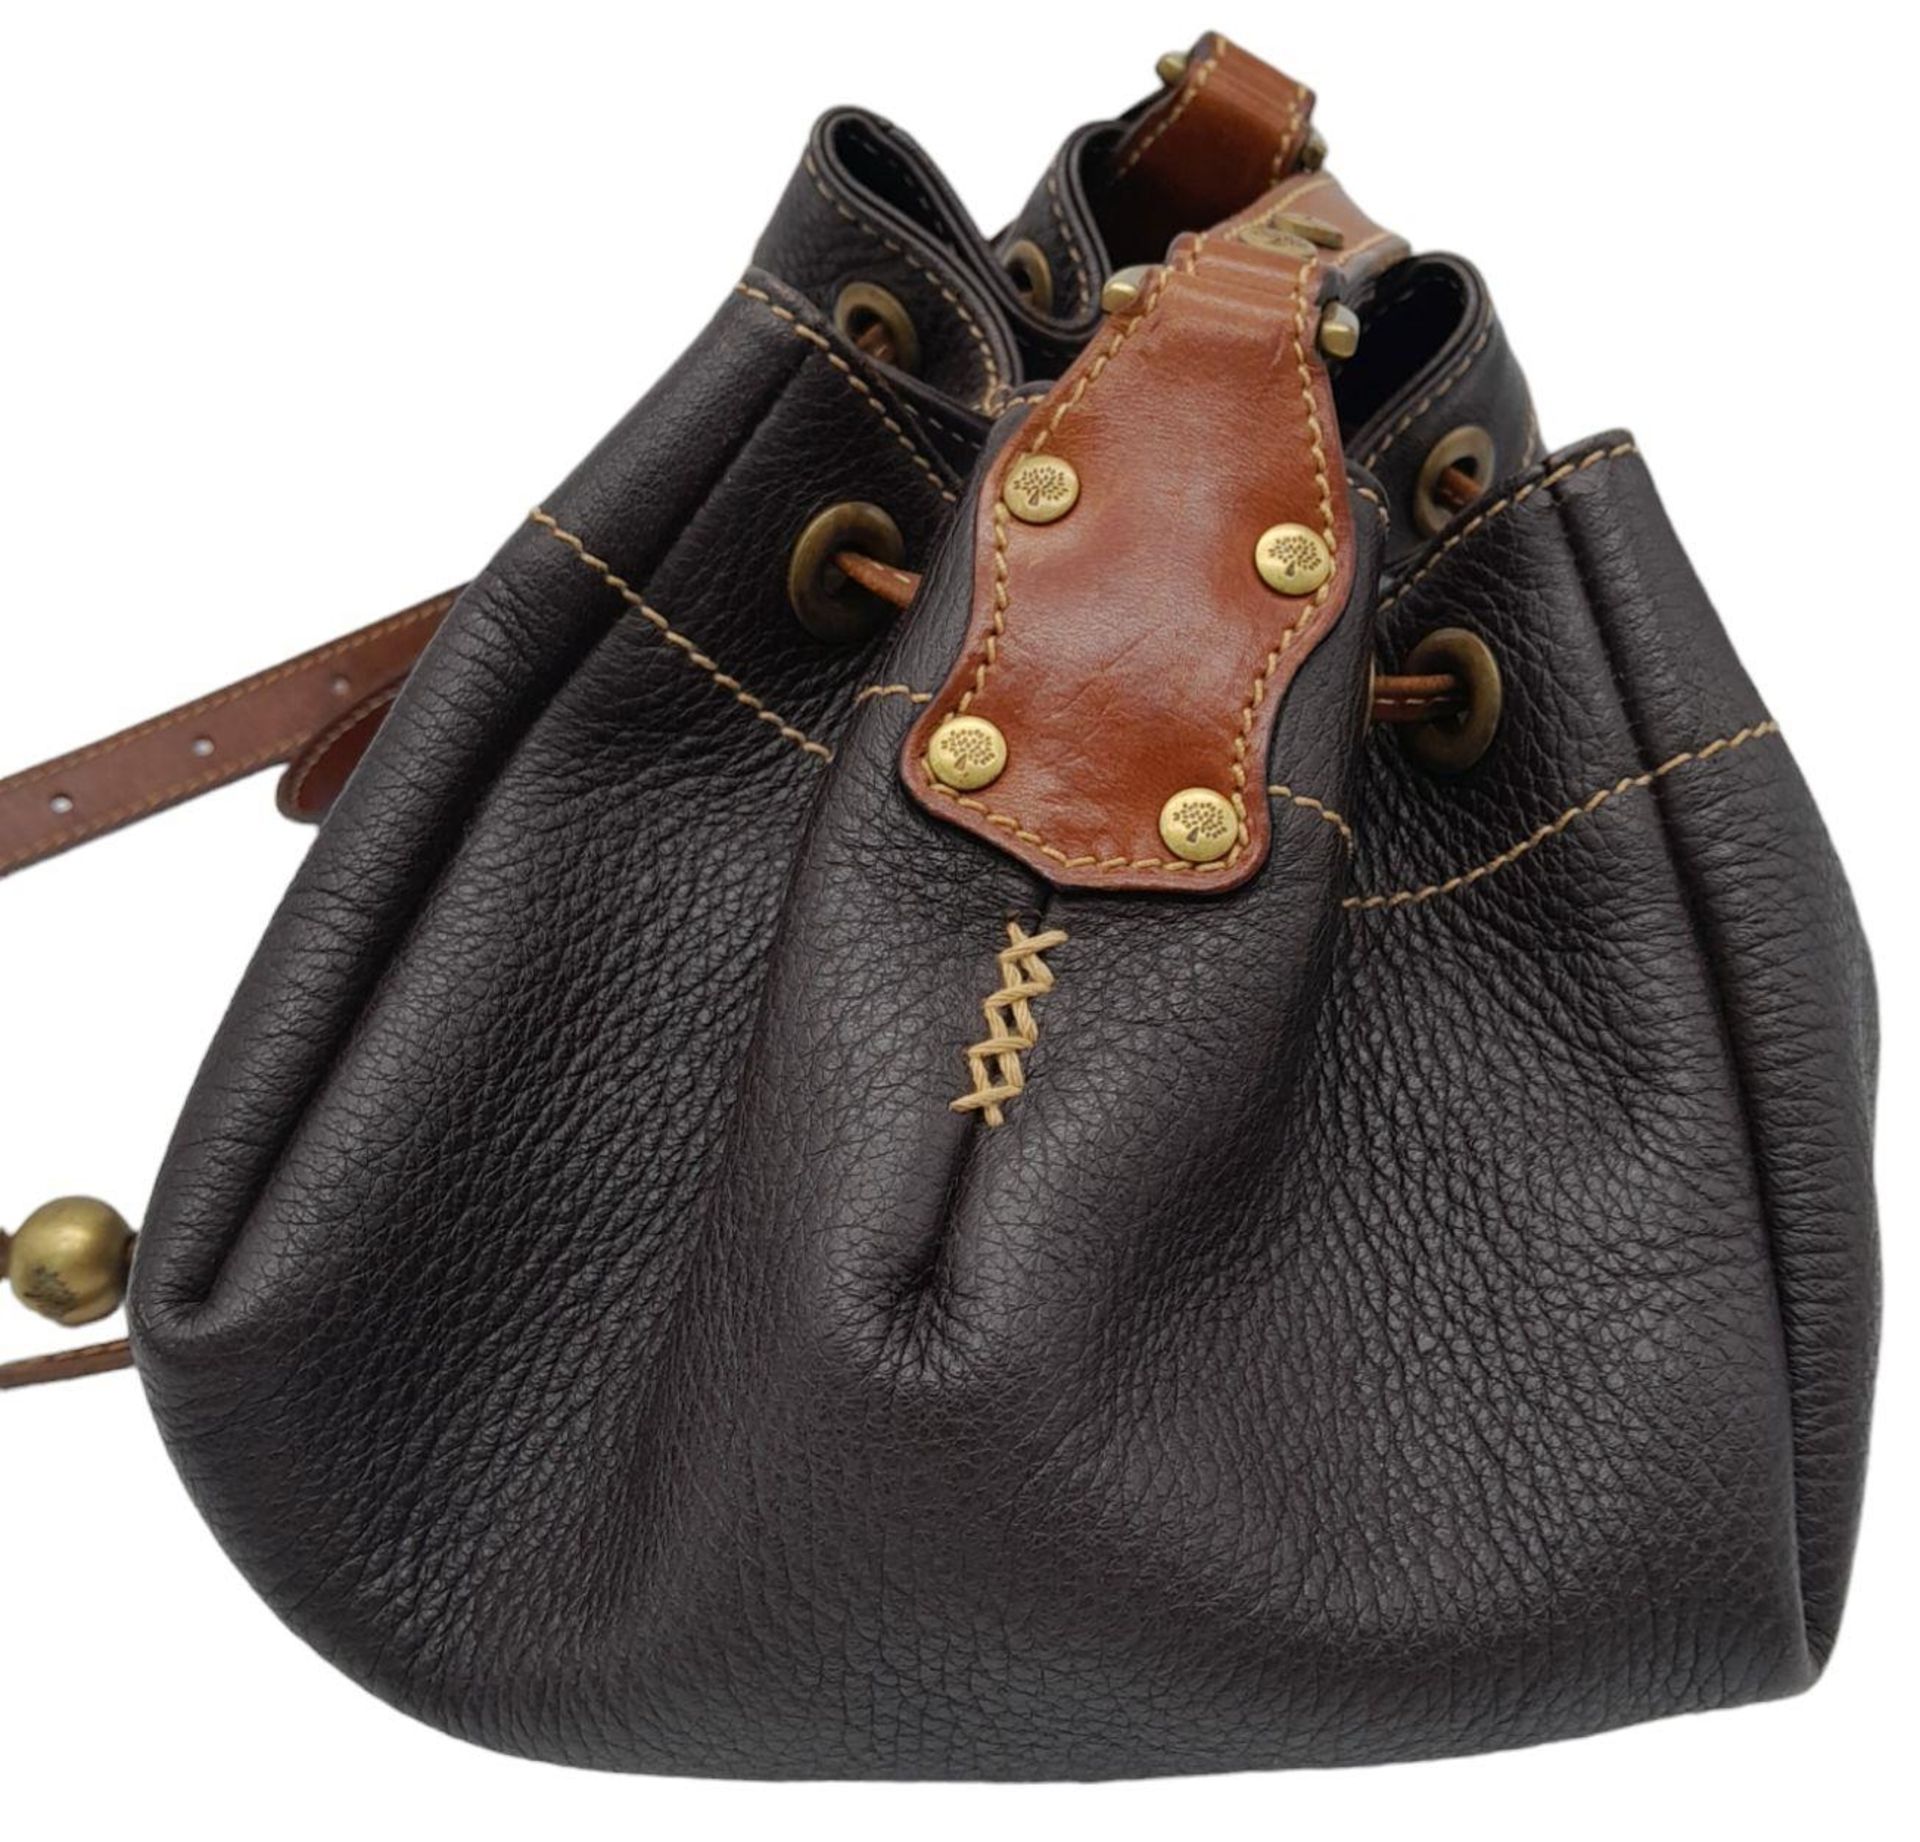 A Mulberry Brown Drawstring Bag. Leather exterior with gold-toned hardware, adjustable strap and - Image 2 of 9